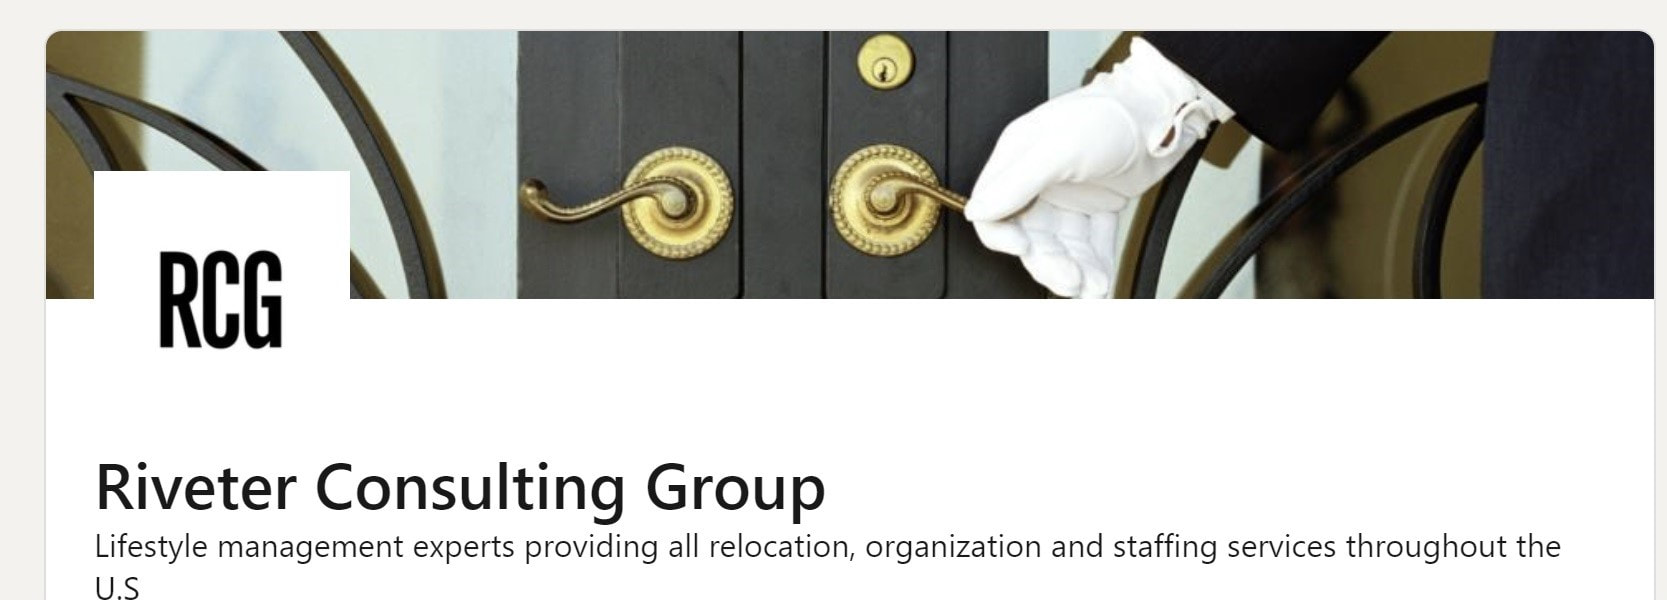 Riveter Consulting Group on LinkedIn